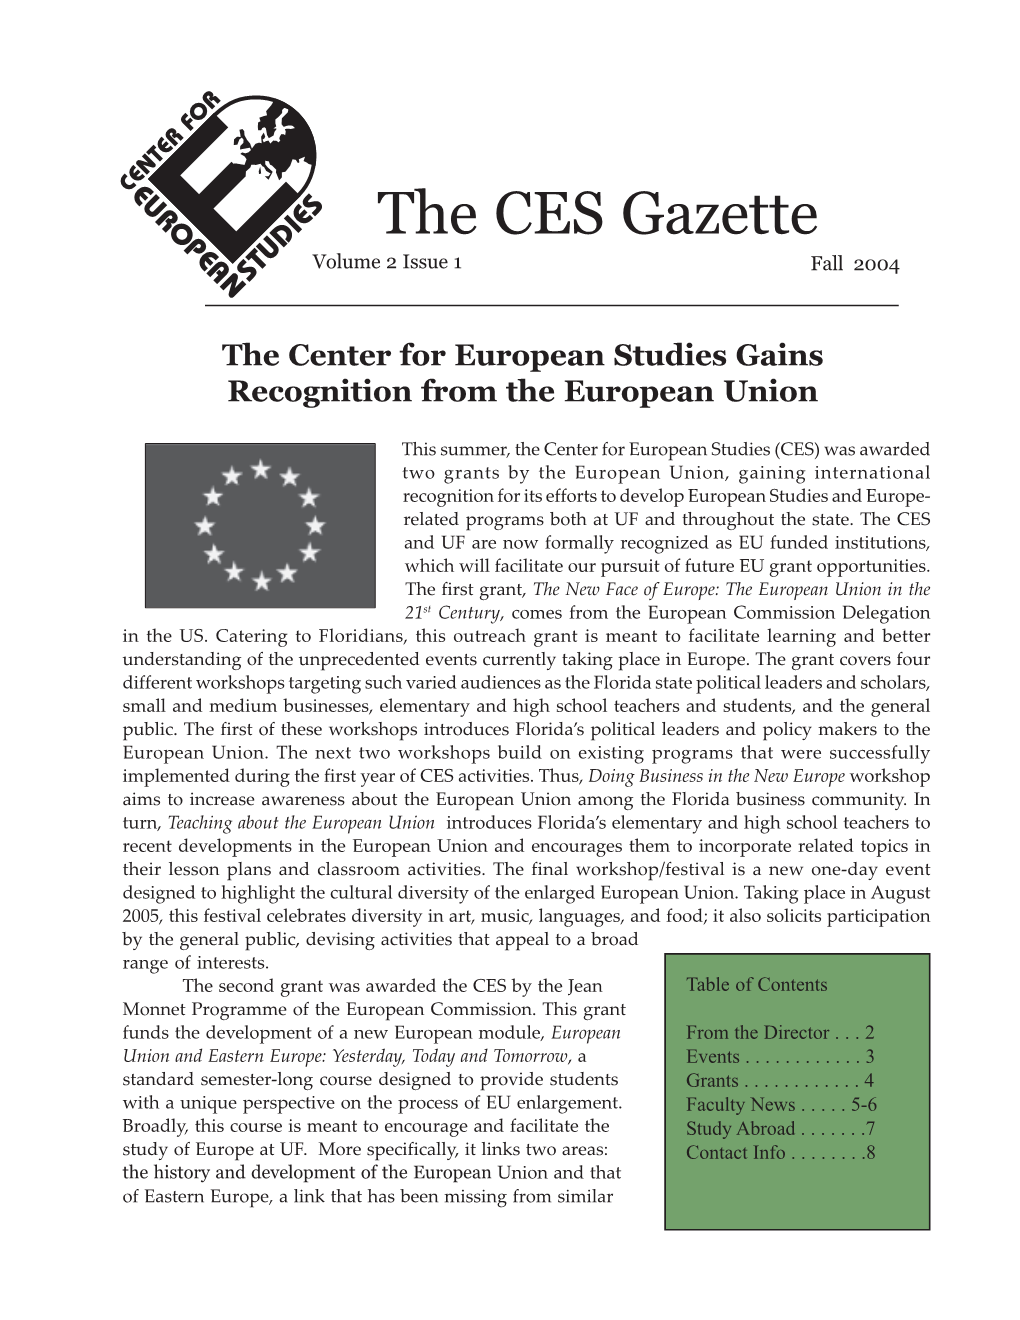 The CES Gazette Volume 2 Issue 1 Fall 2004